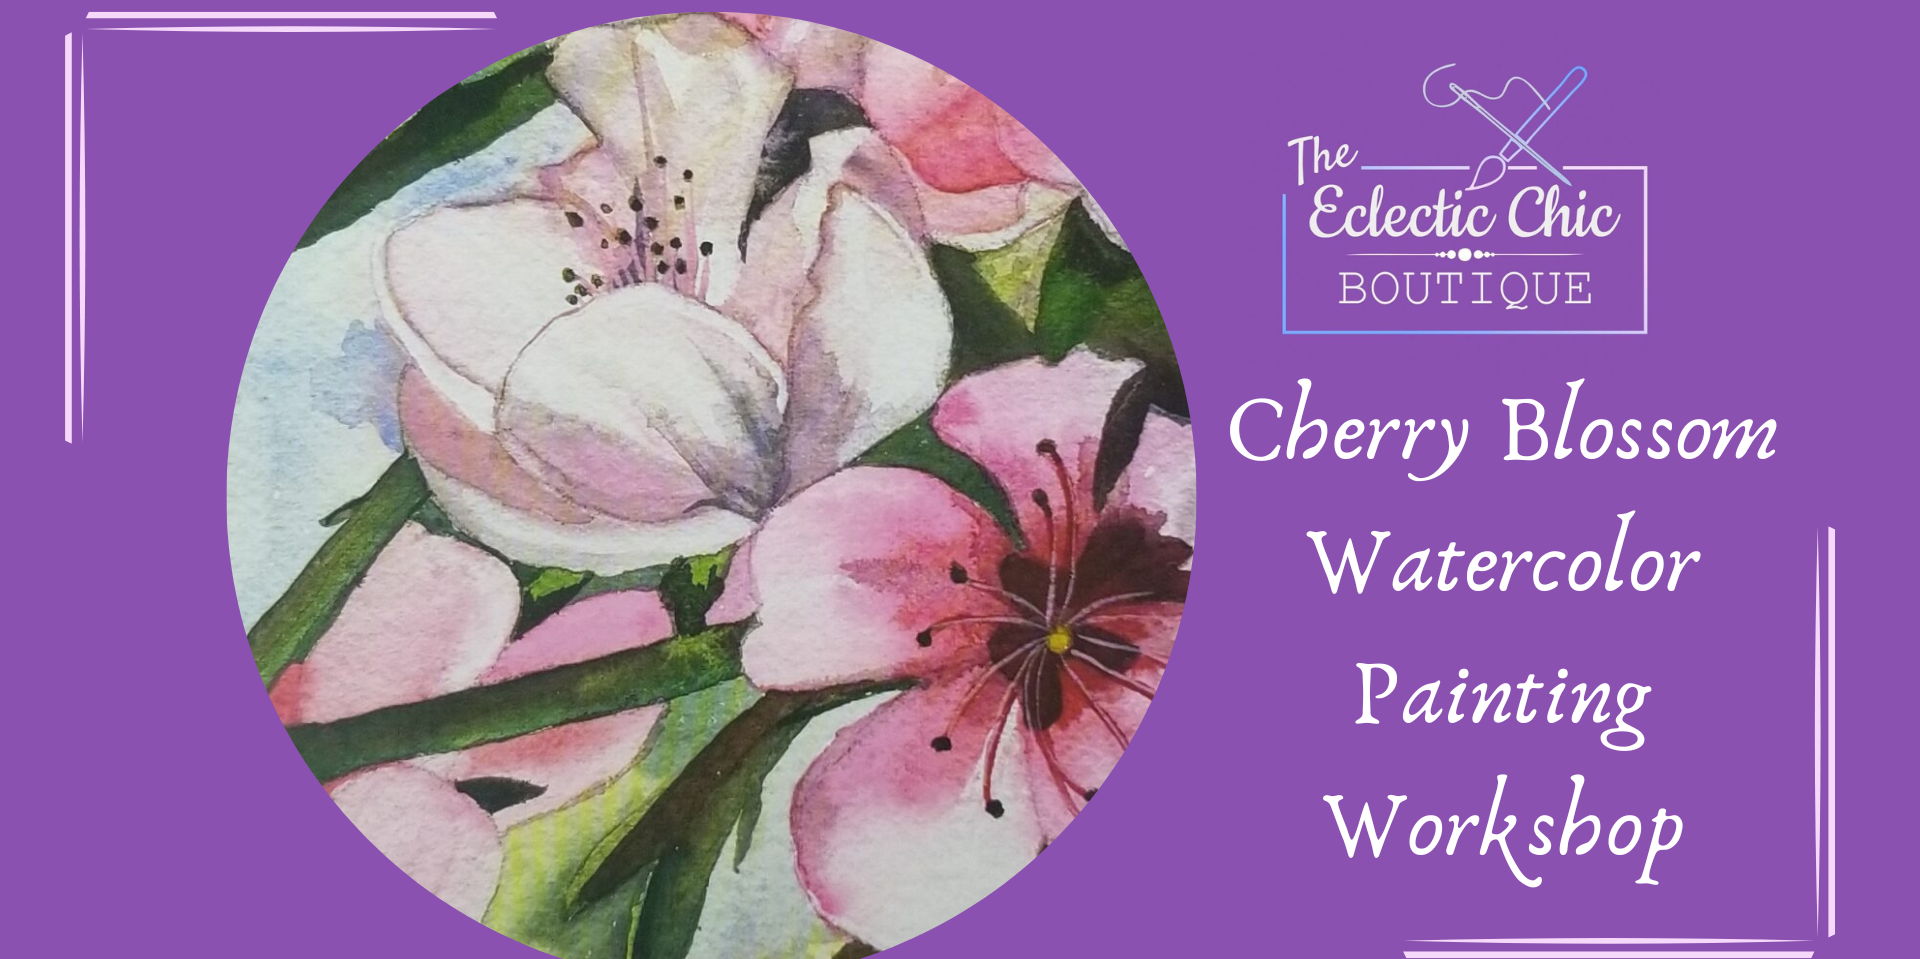 Cherry Blossom Watercolor Painting Workshop promotional image